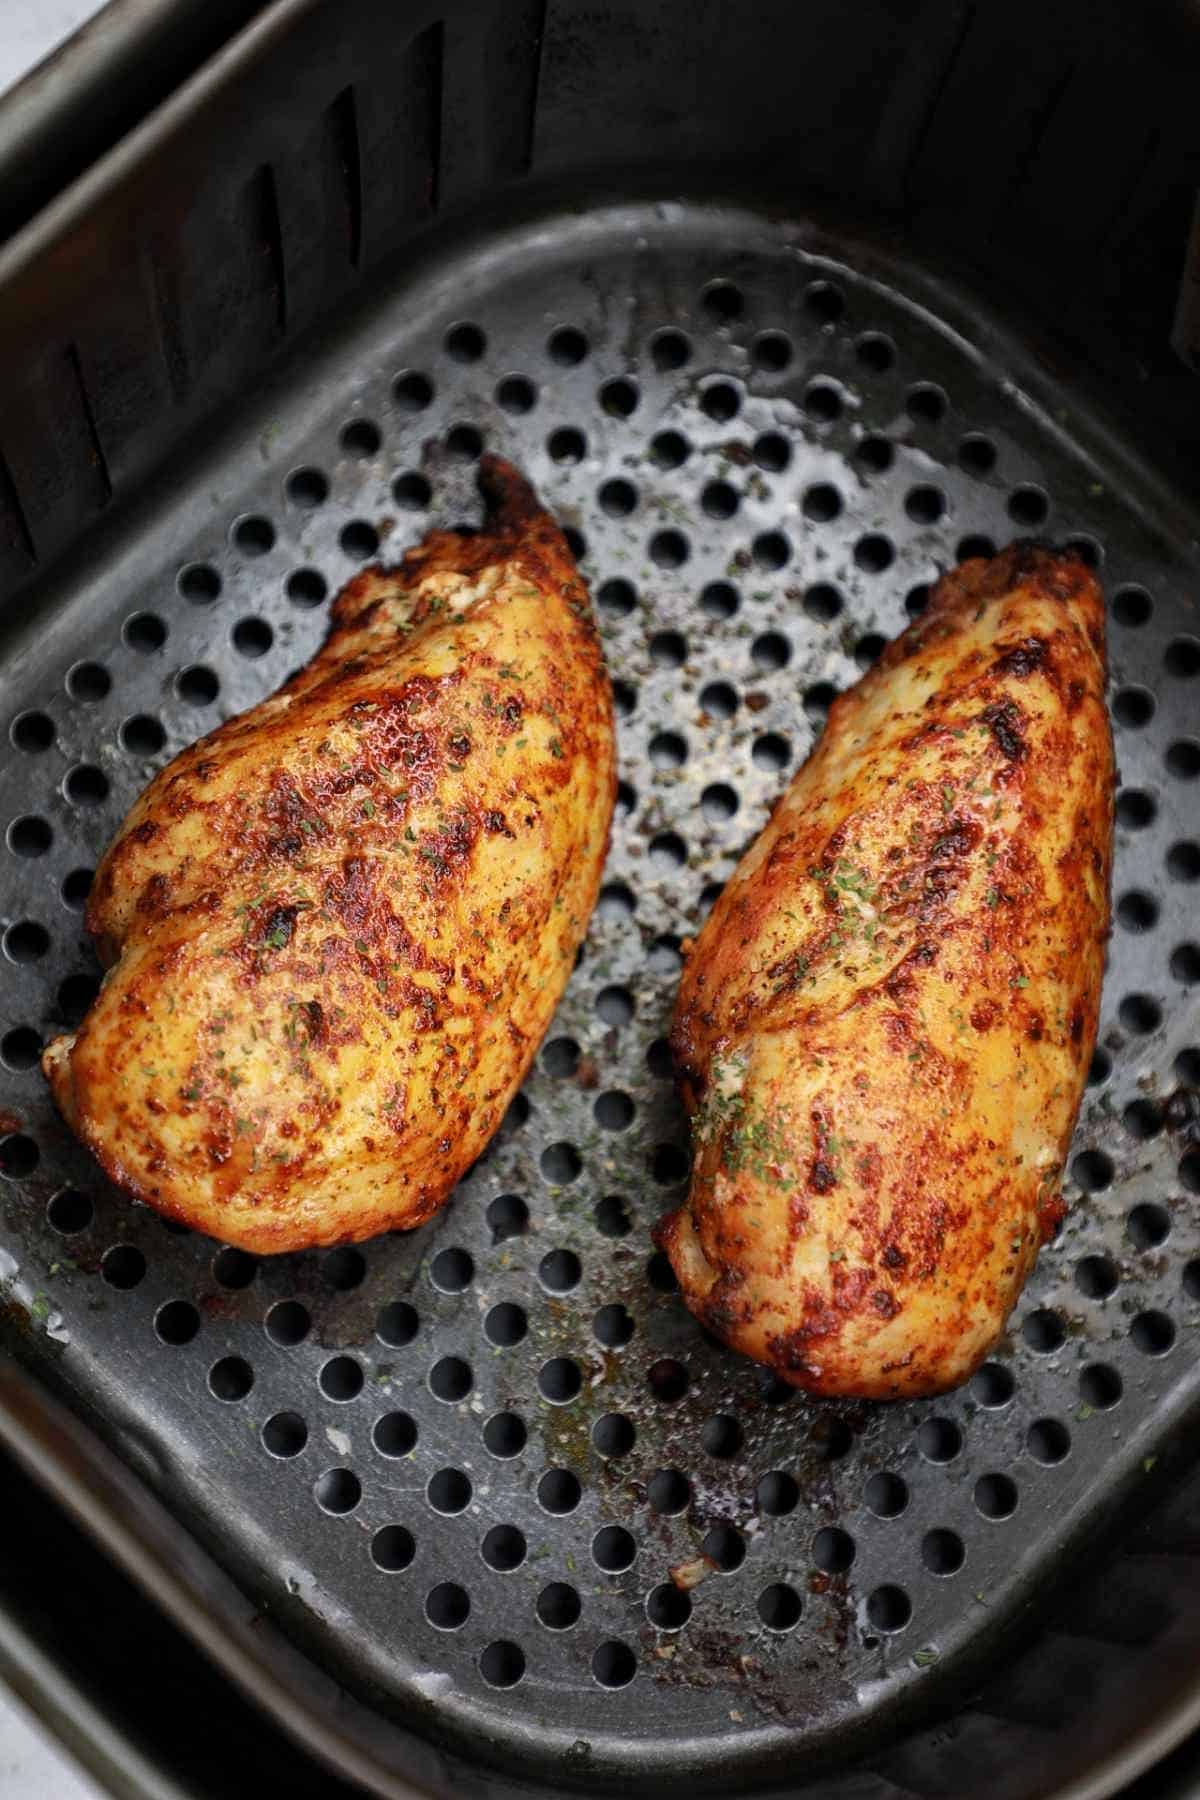 the cooked chicken displayed in the air fryer.